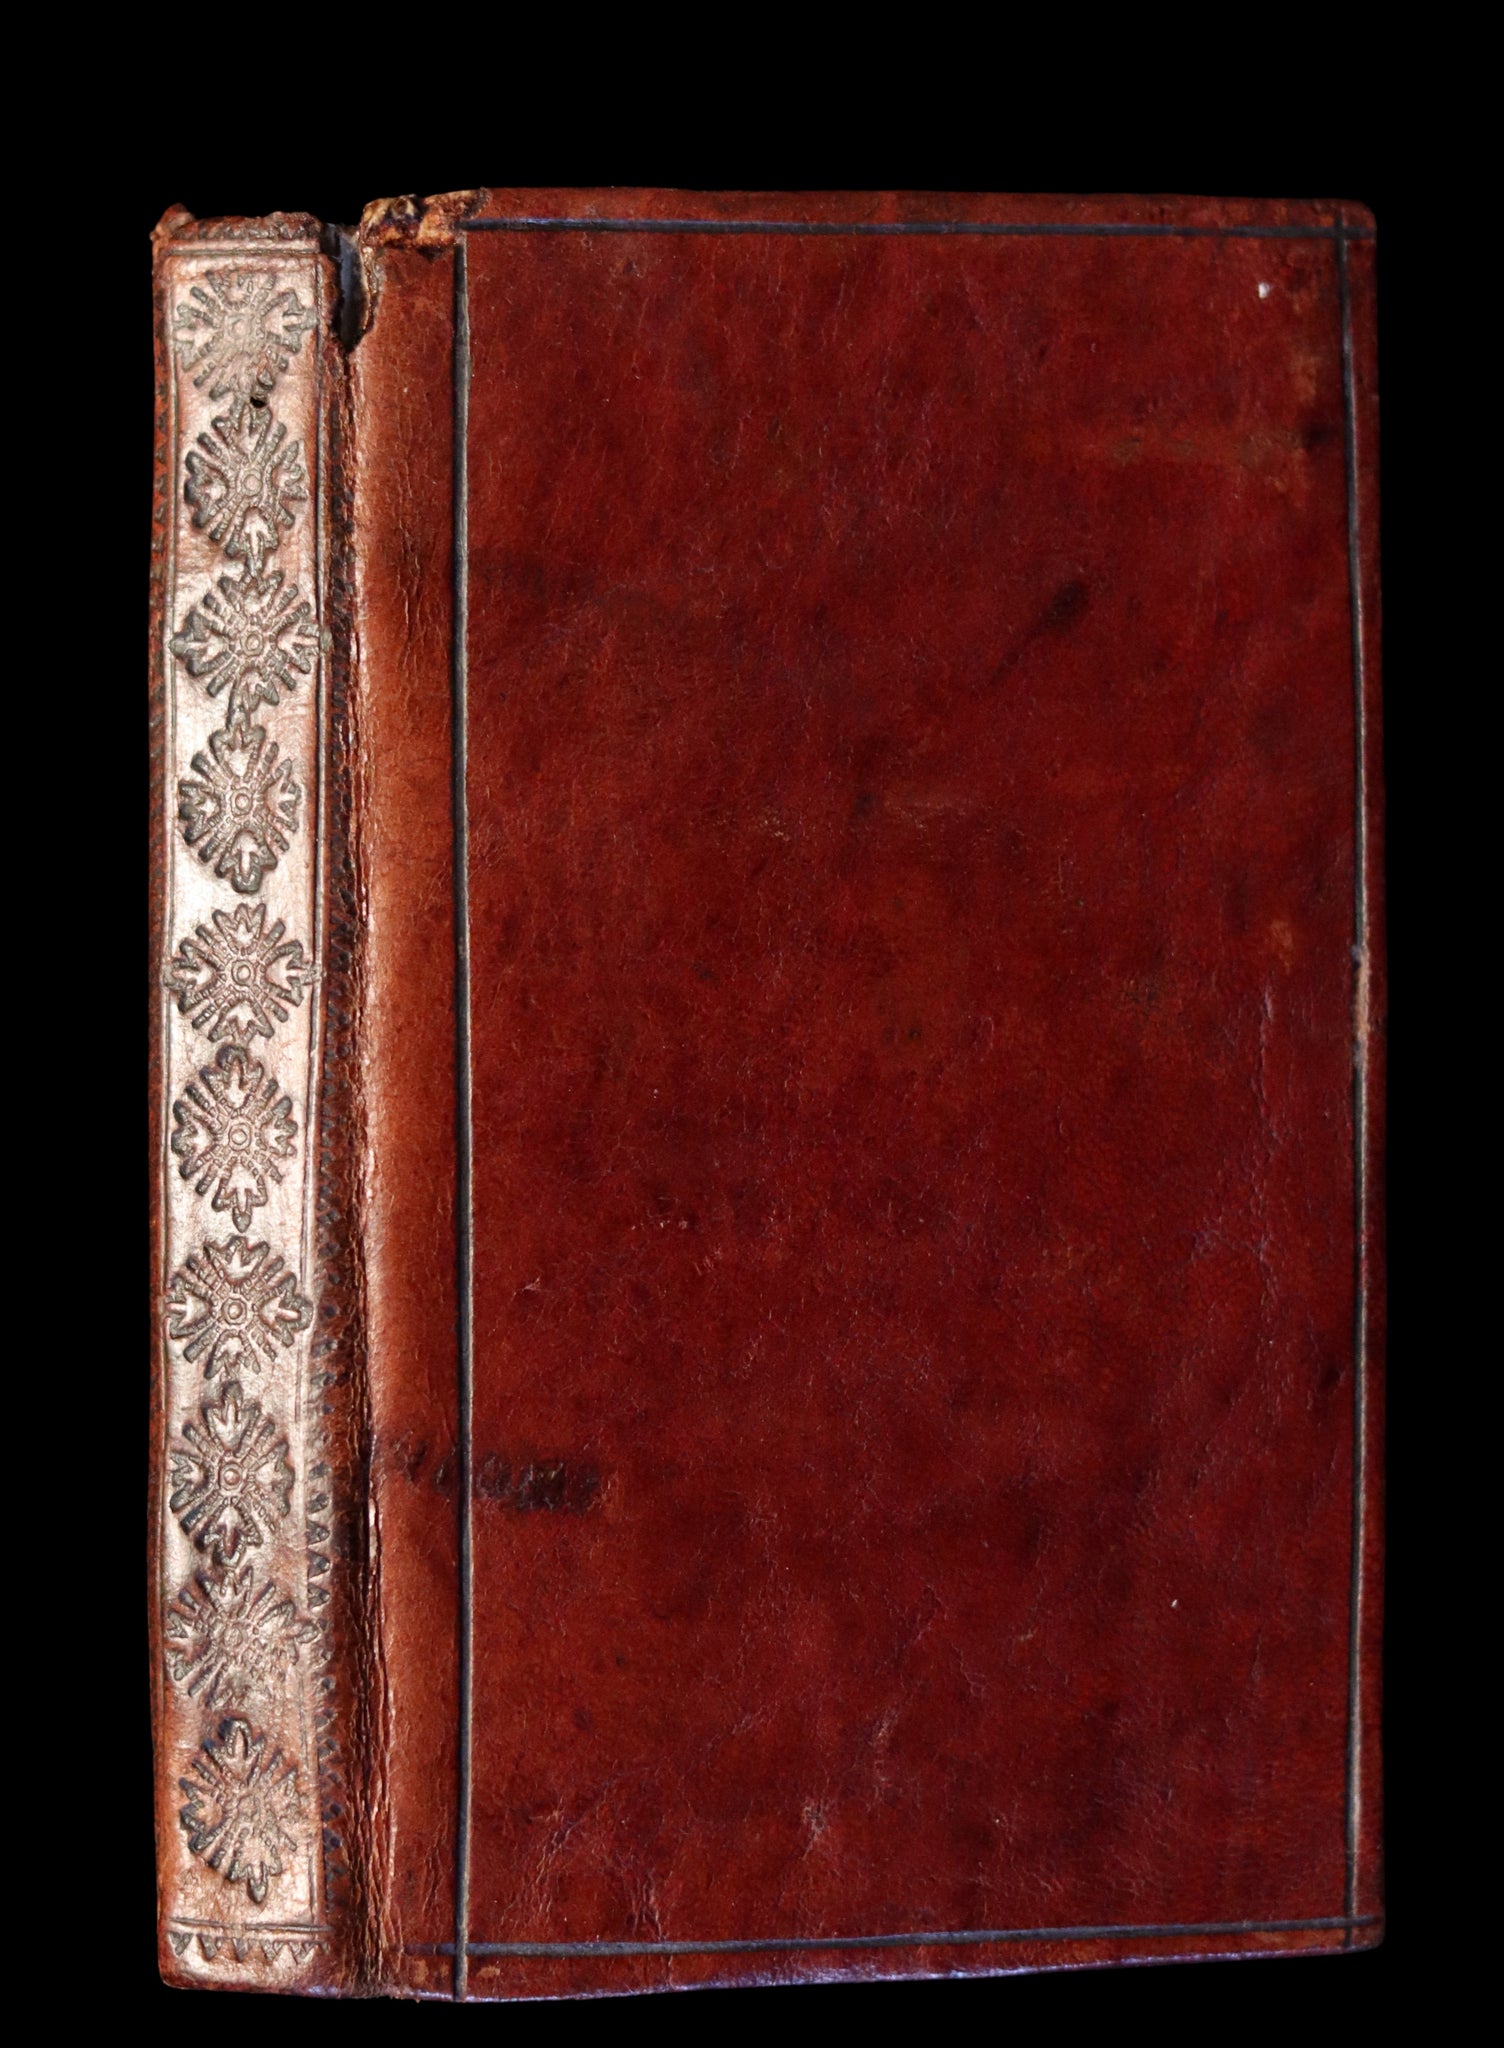 1728 Scarce Latin Book - The Sacred Heart of Blessed Virgin Mary or the sum of the Sanctity by Giovanni Pietro Pinamonti.